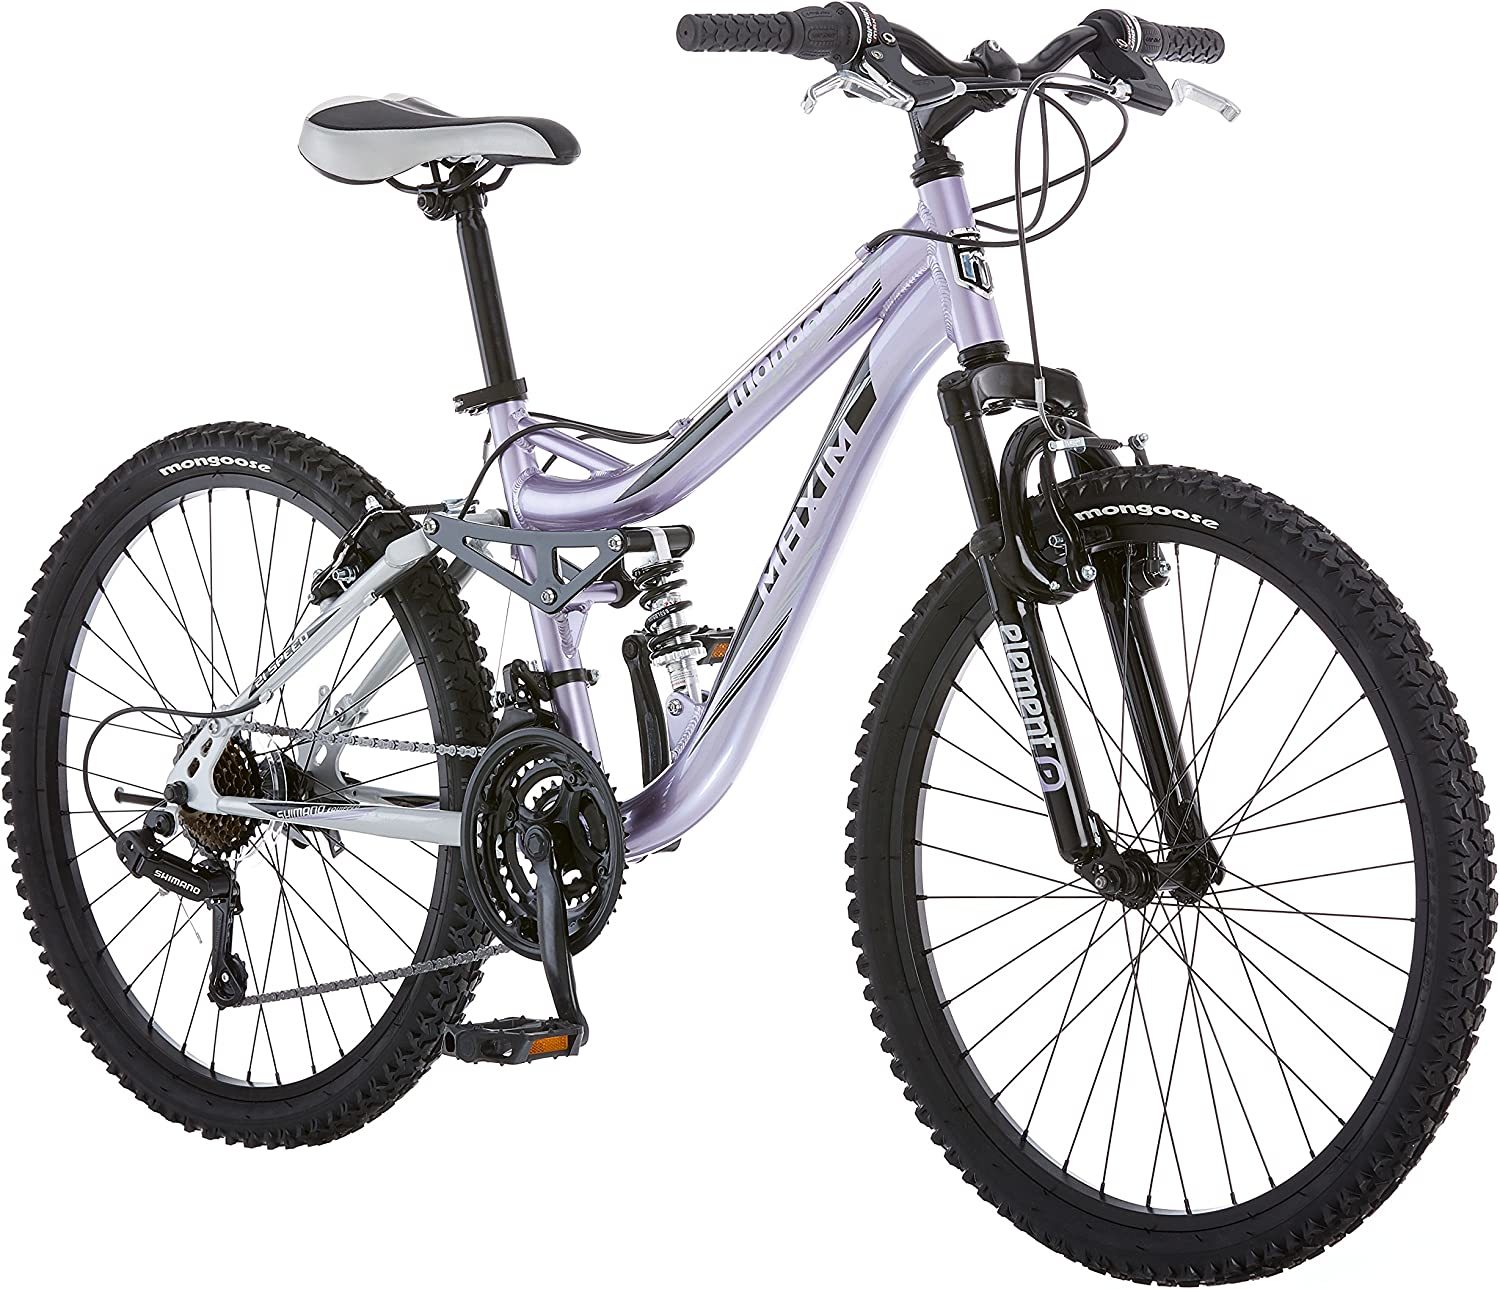 24-Inch Wheels, An Aluminum Frame, A 21-Speed Drivetrain, And Lavender Make Up - $415.93